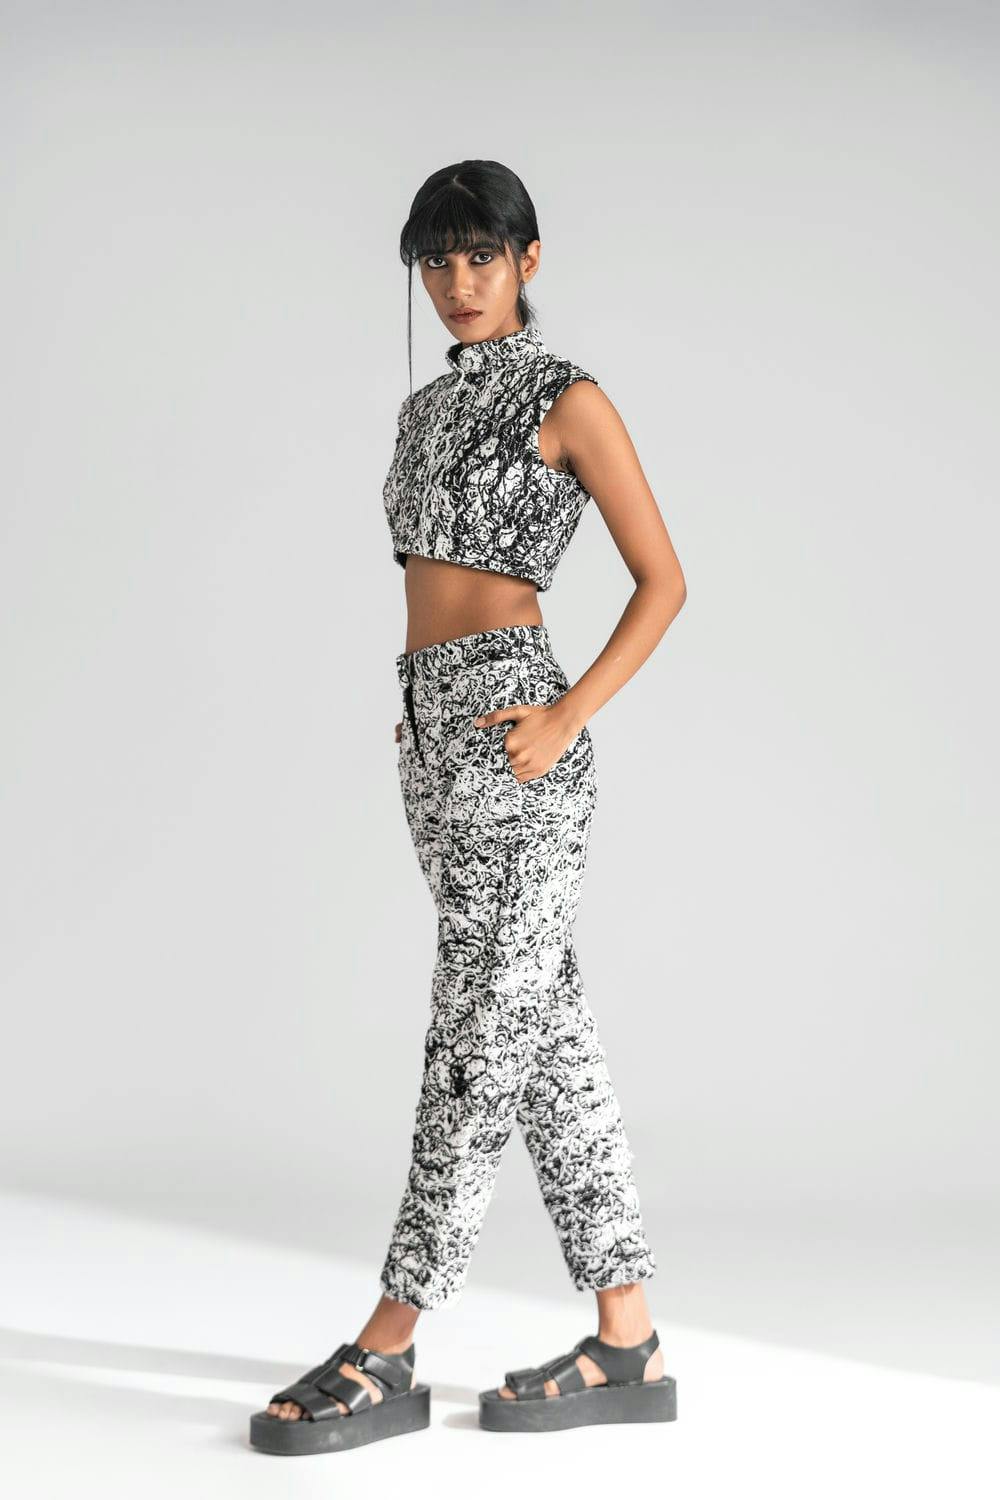 ATBW - Externals Crop Top with Pants, a product by ATBW